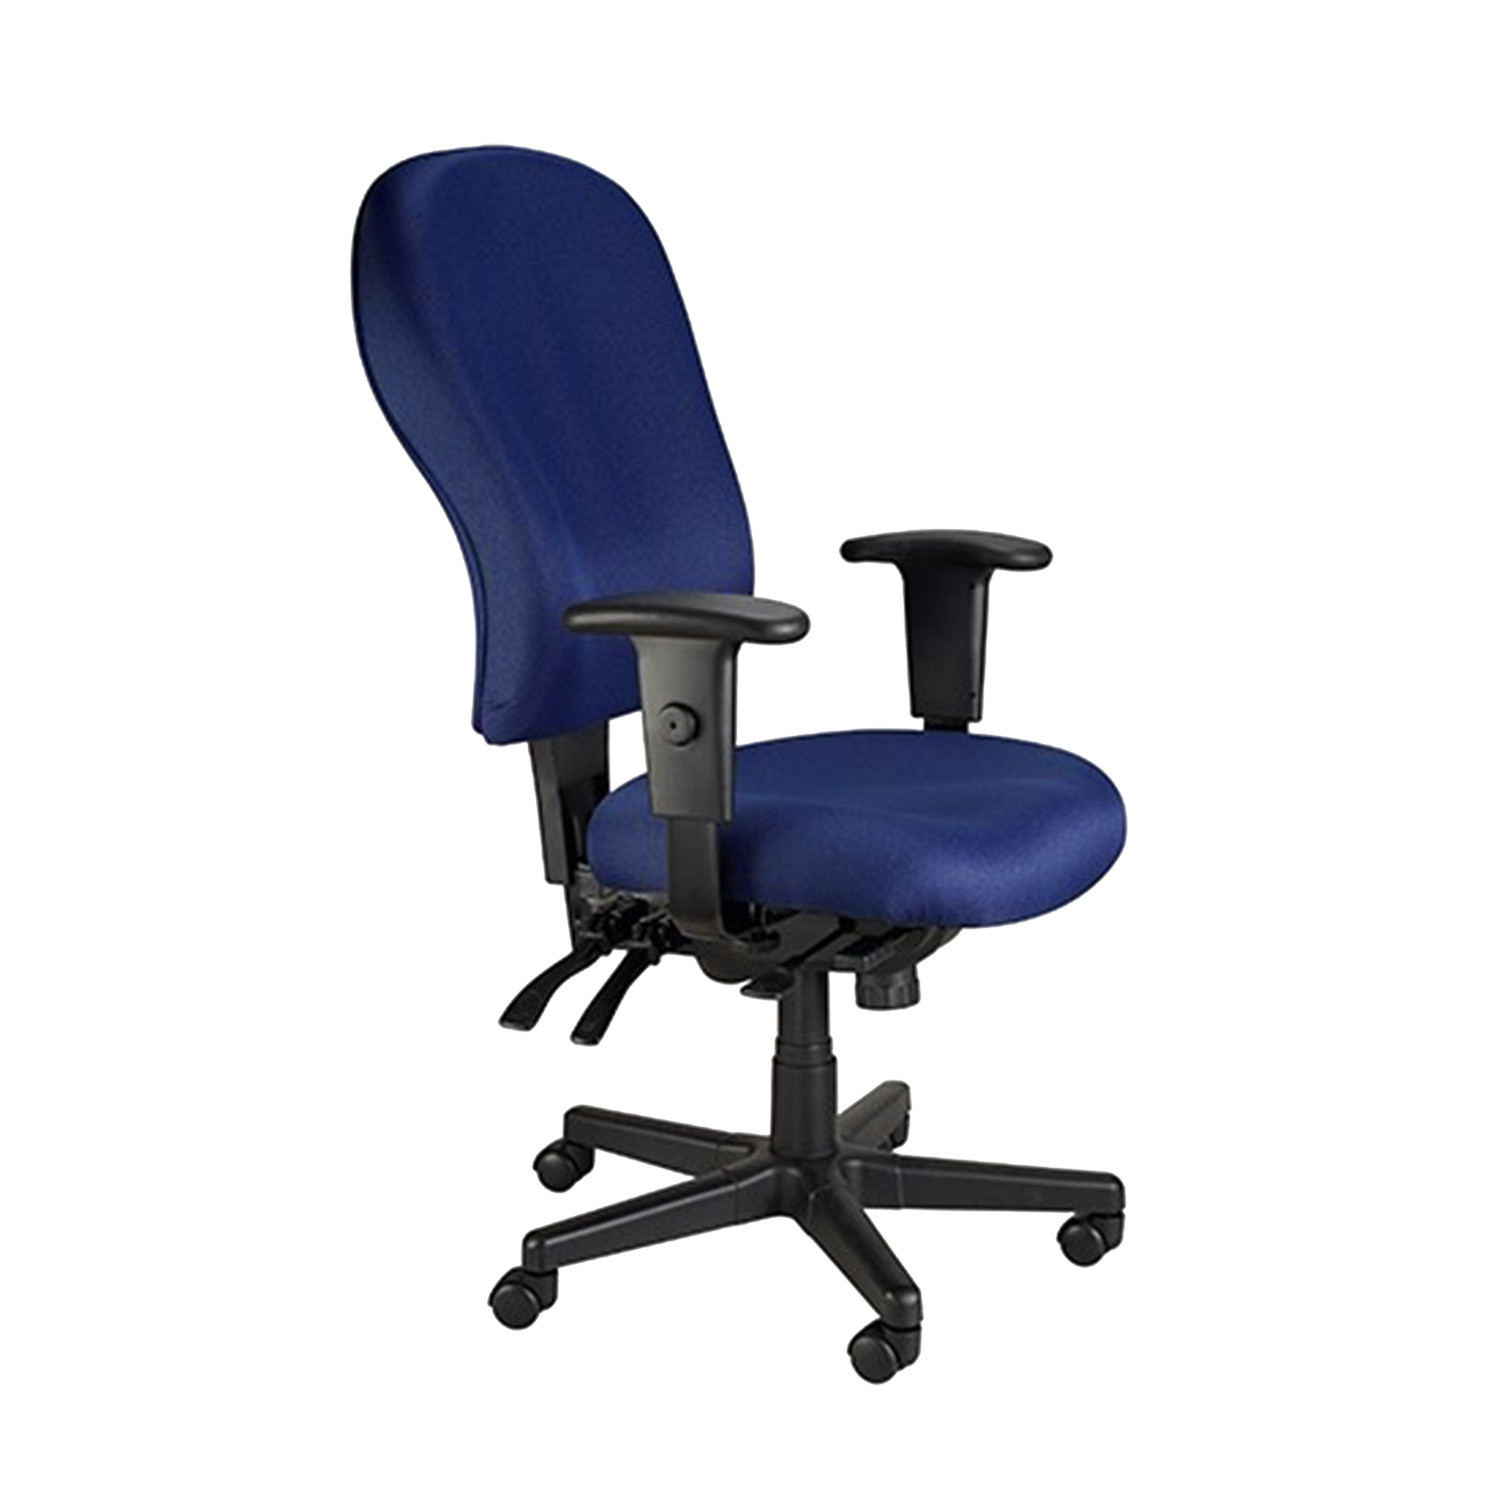 Navy Blue and Black Adjustable Swivel Fabric Rolling Office Chair-372354-1